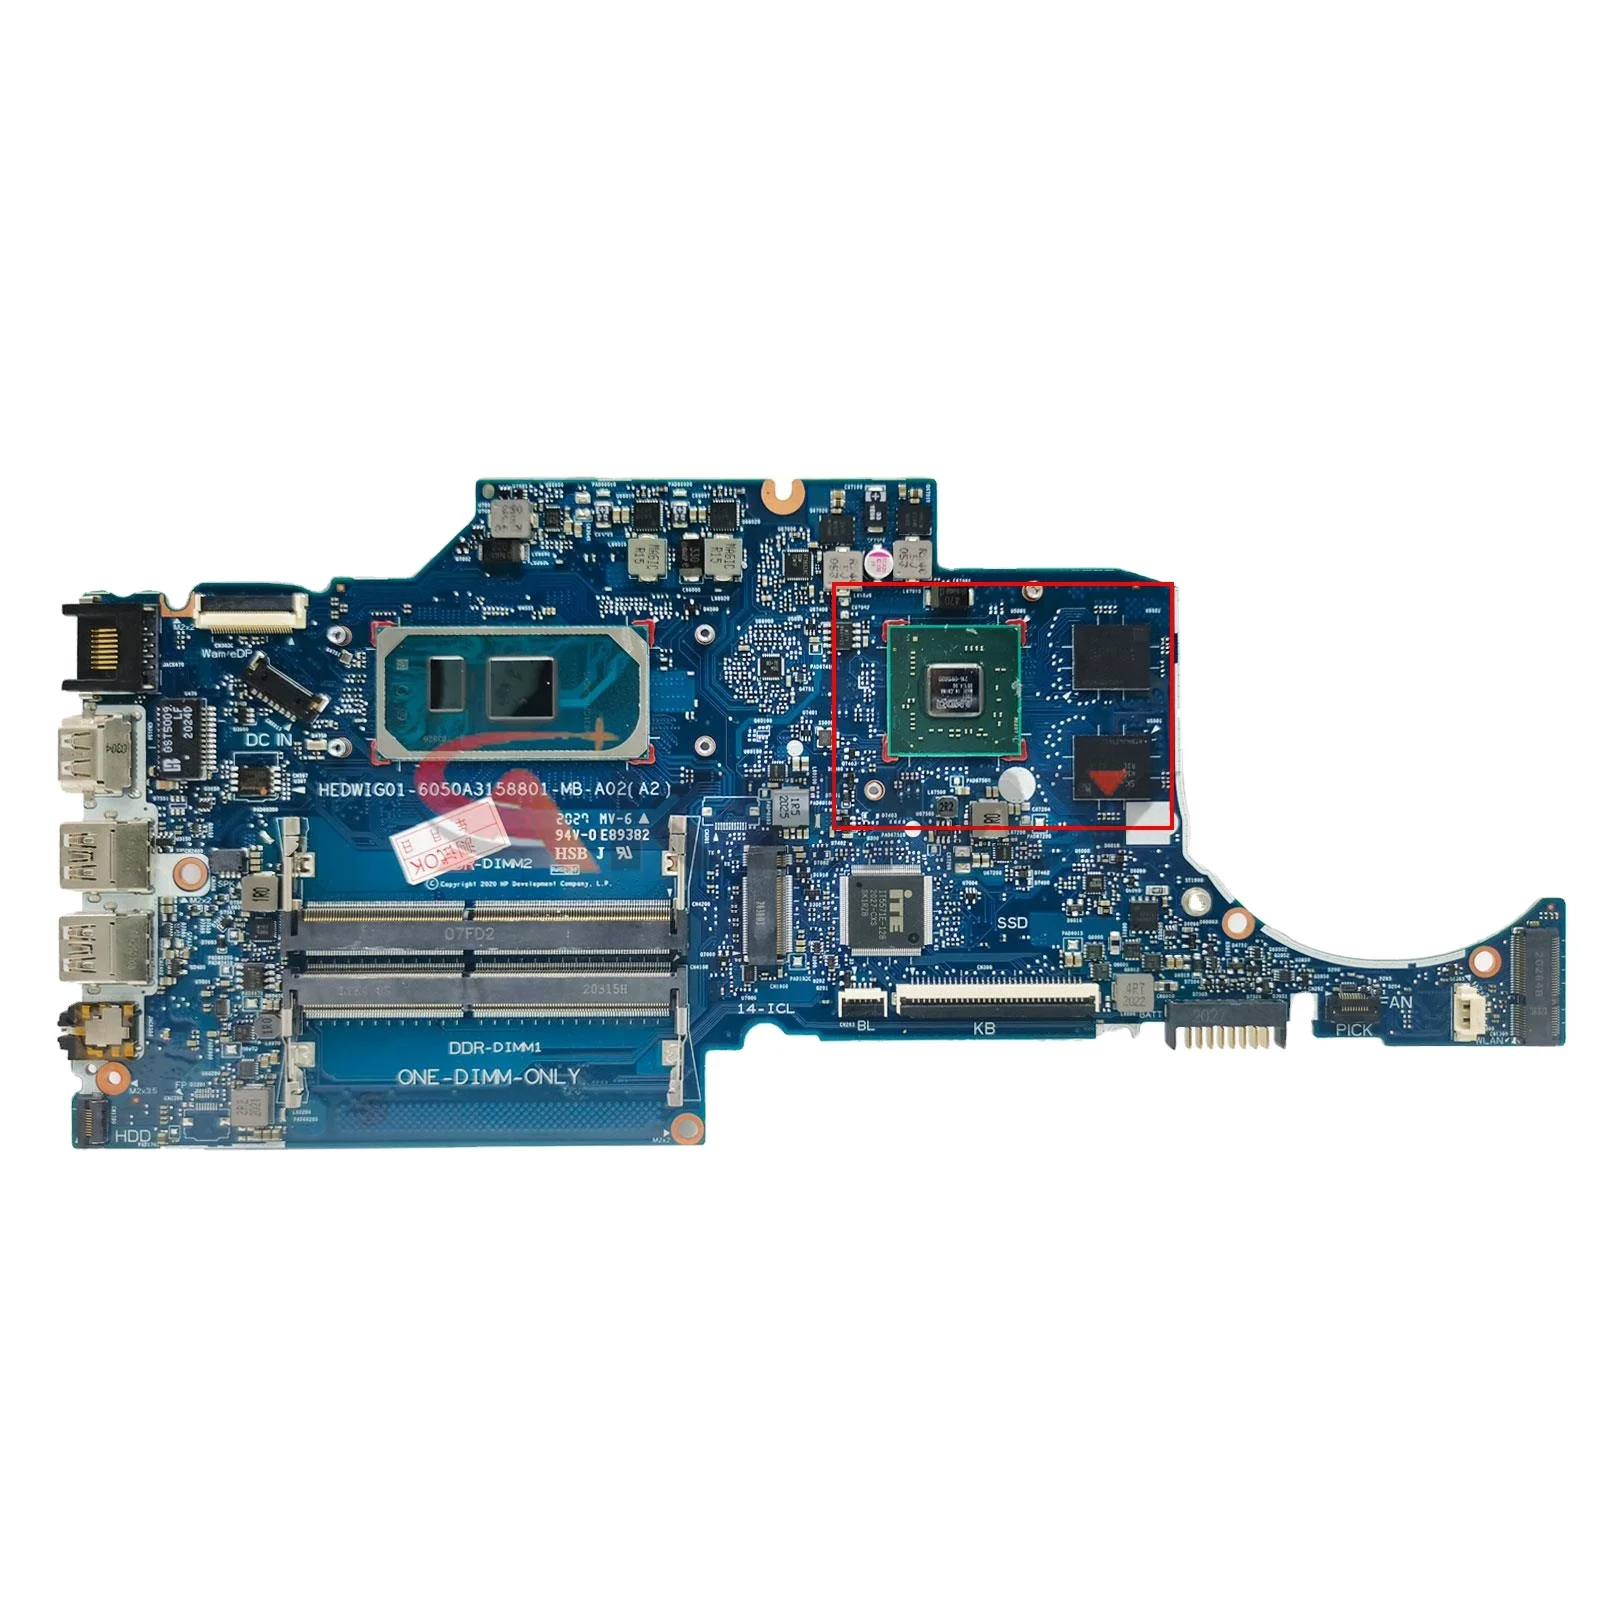 

For Hp 14-CK 14-CF 240 G7 Laptop Motherboard 6050A3158801-MB Notebook mainboard W/ i3-1005G1 i5-1035G1 CPU L89470-601 L89470-001